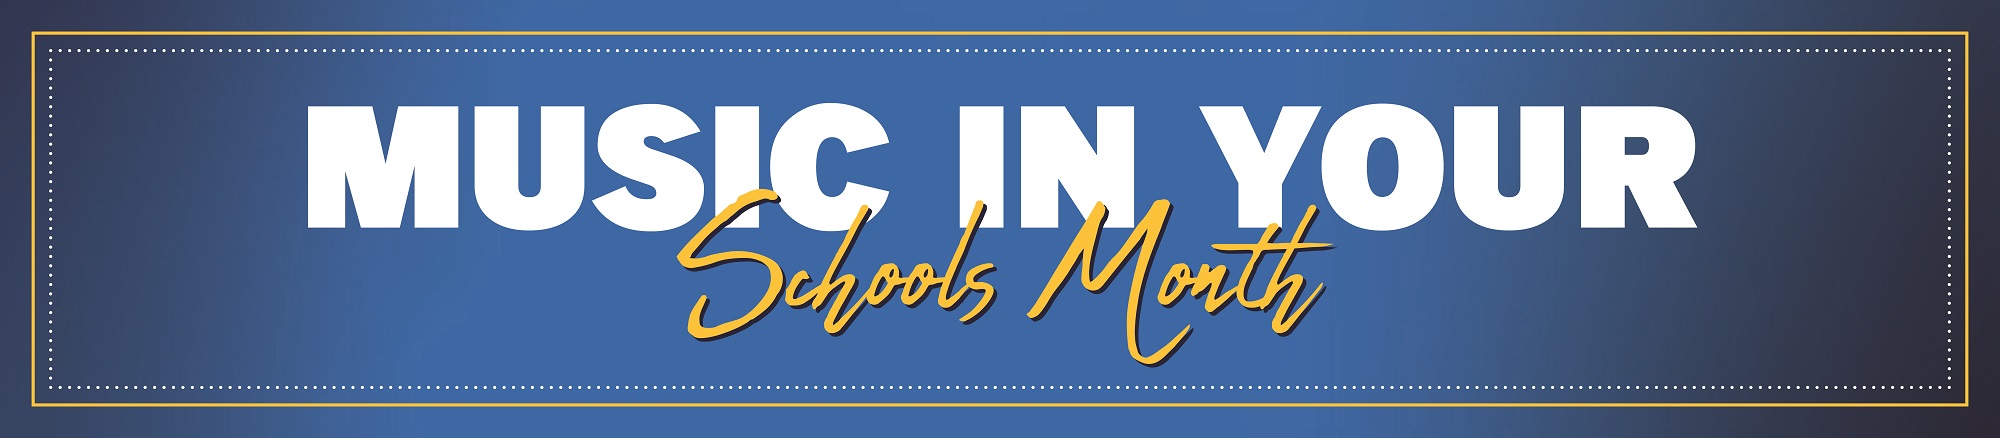 Music In Your Schools Month